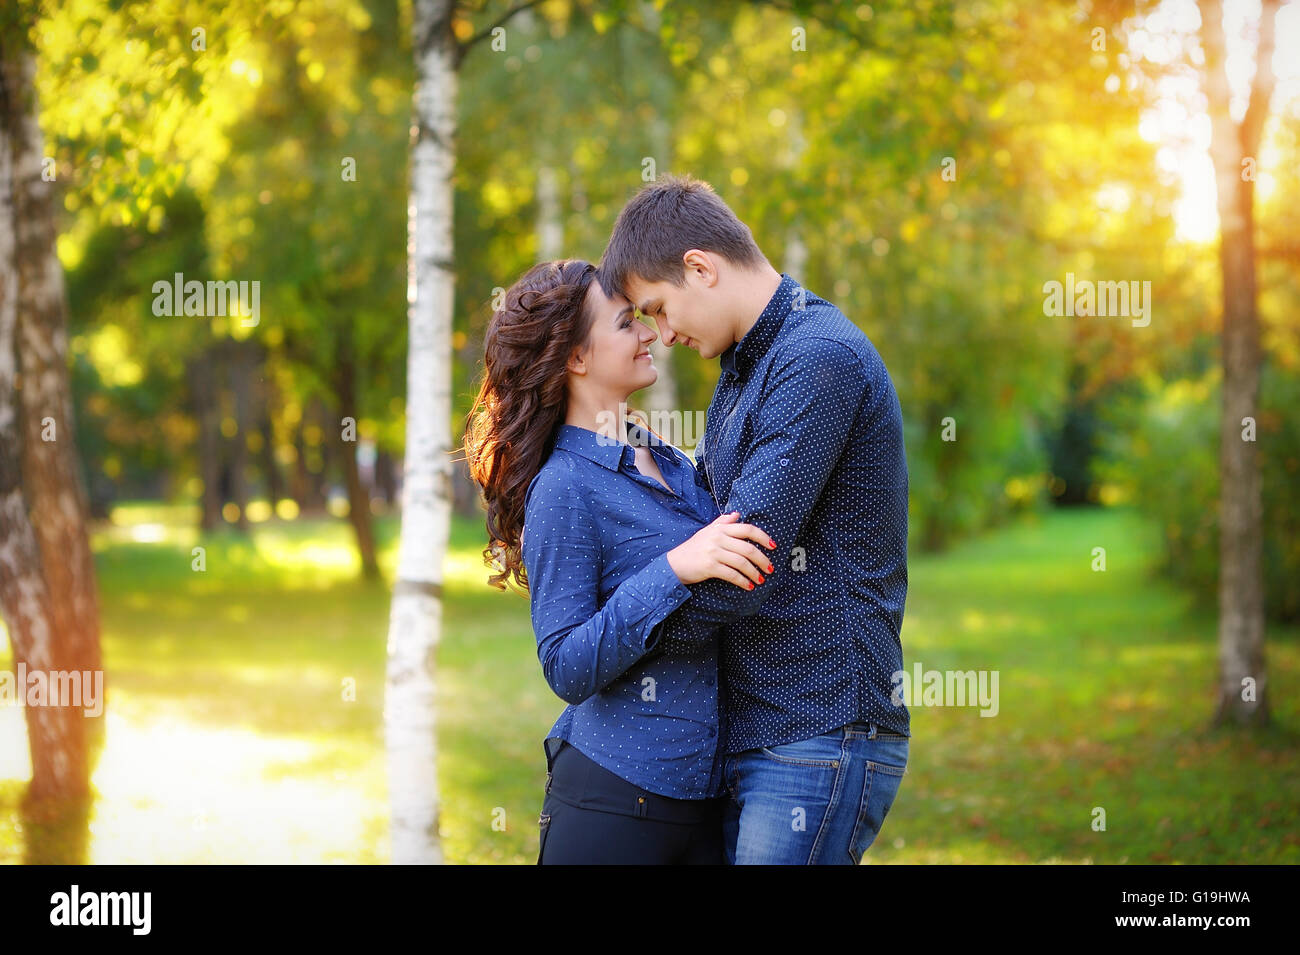 Happy Smiling Couple in love Banque D'Images